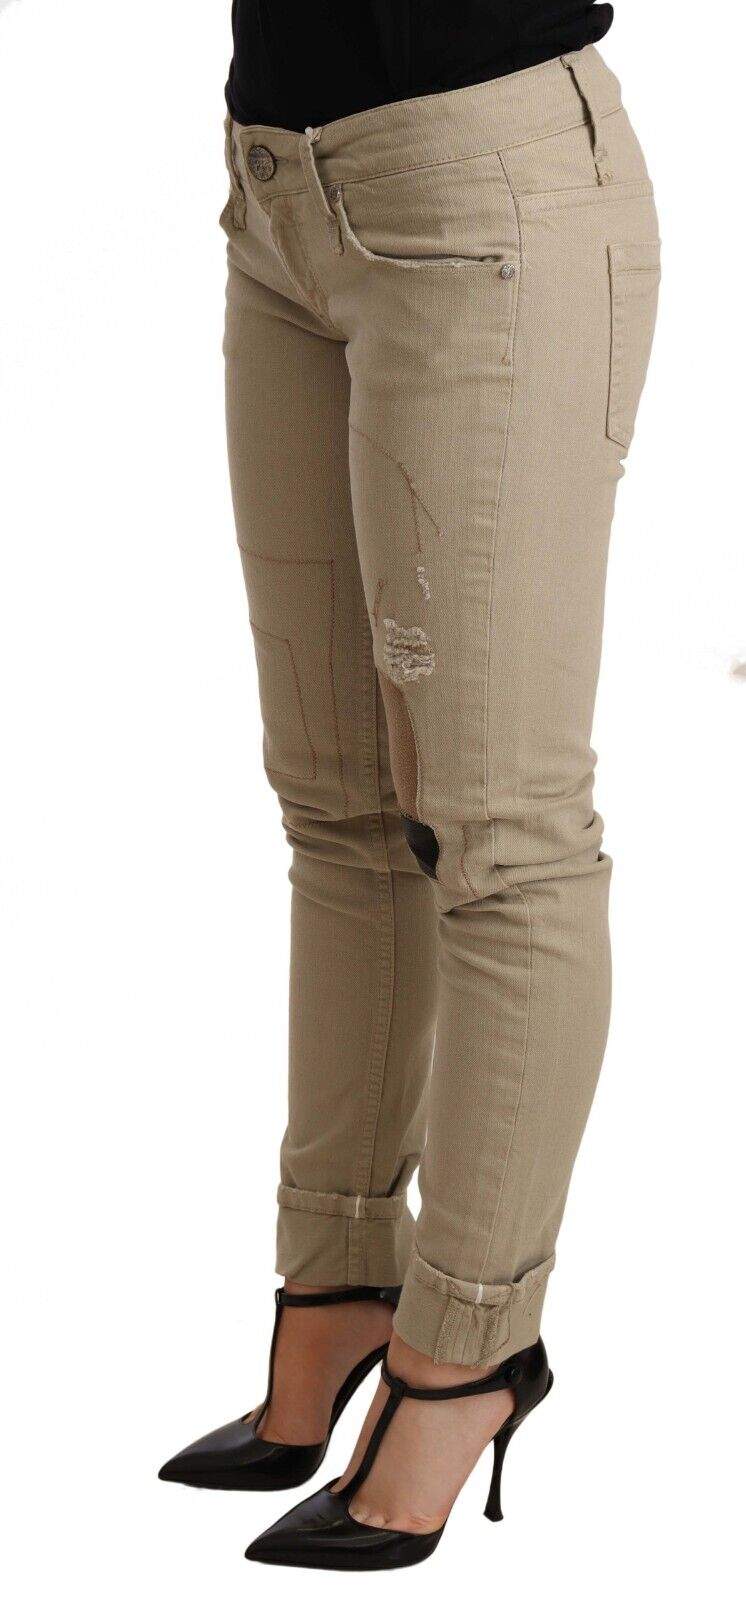 Acht Beige Denim Cotton Bottom Slim Fit Folded Pant Acht, Beige, feed-agegroup-adult, feed-color-Beige, feed-gender-female, Jeans & Pants - Women - Clothing, W26 | IT40 at SEYMAYKA